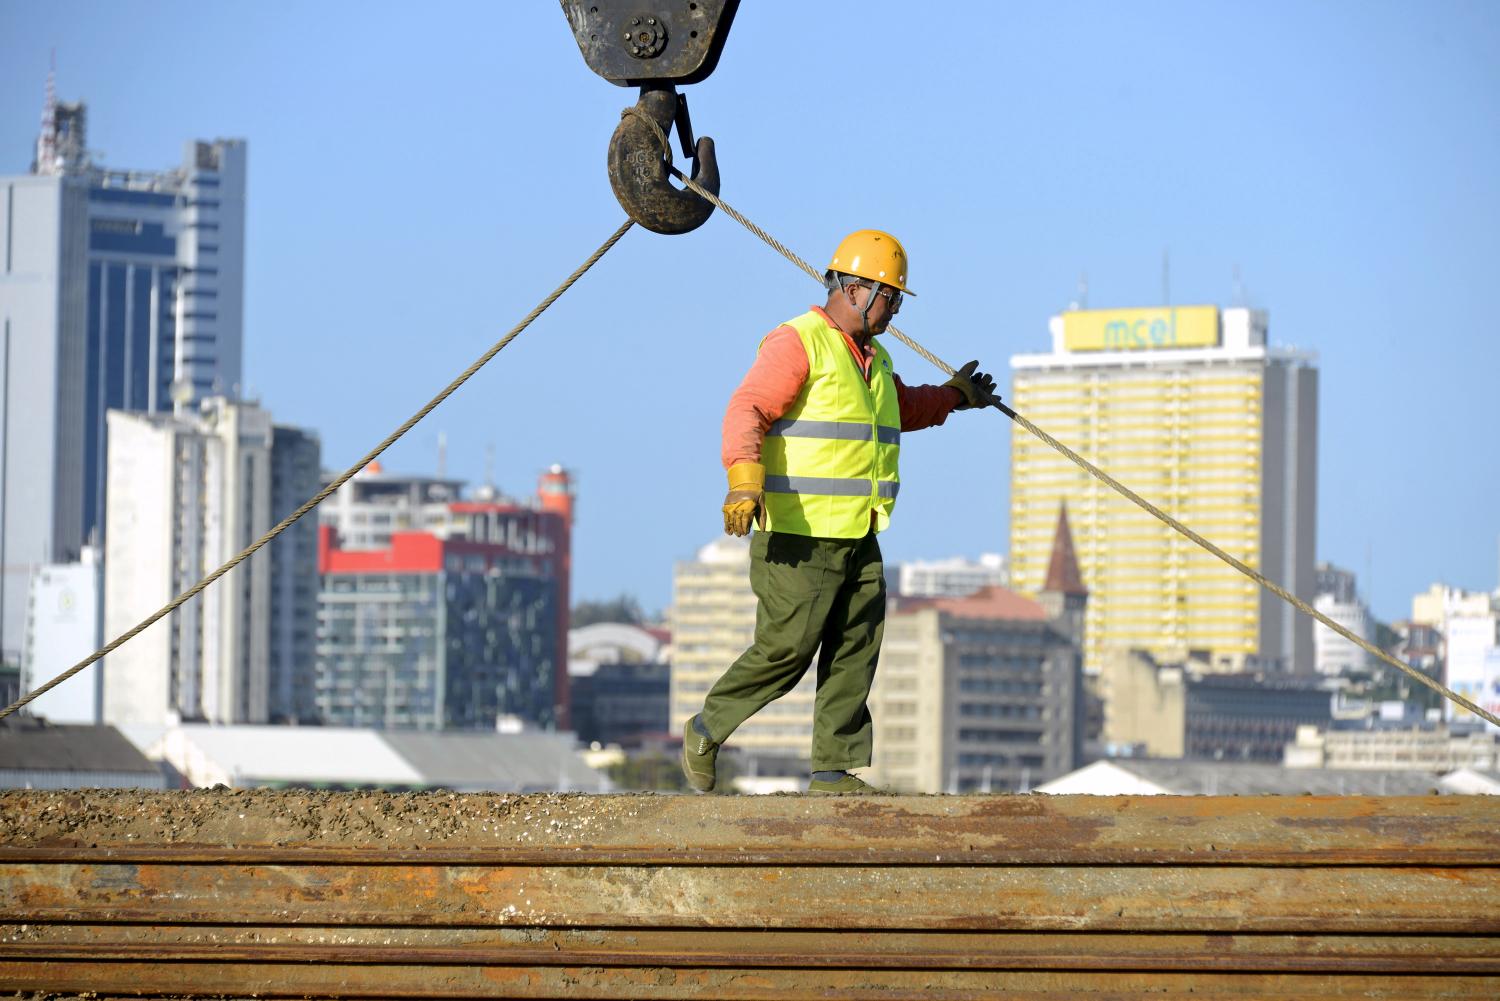 A Chinese construction worker helps build a new bridge against the skyline of Mozambique's capital Maputo April 15, 2016. REUTERS/Grant Lee Neuenburg - RTX2BG6I